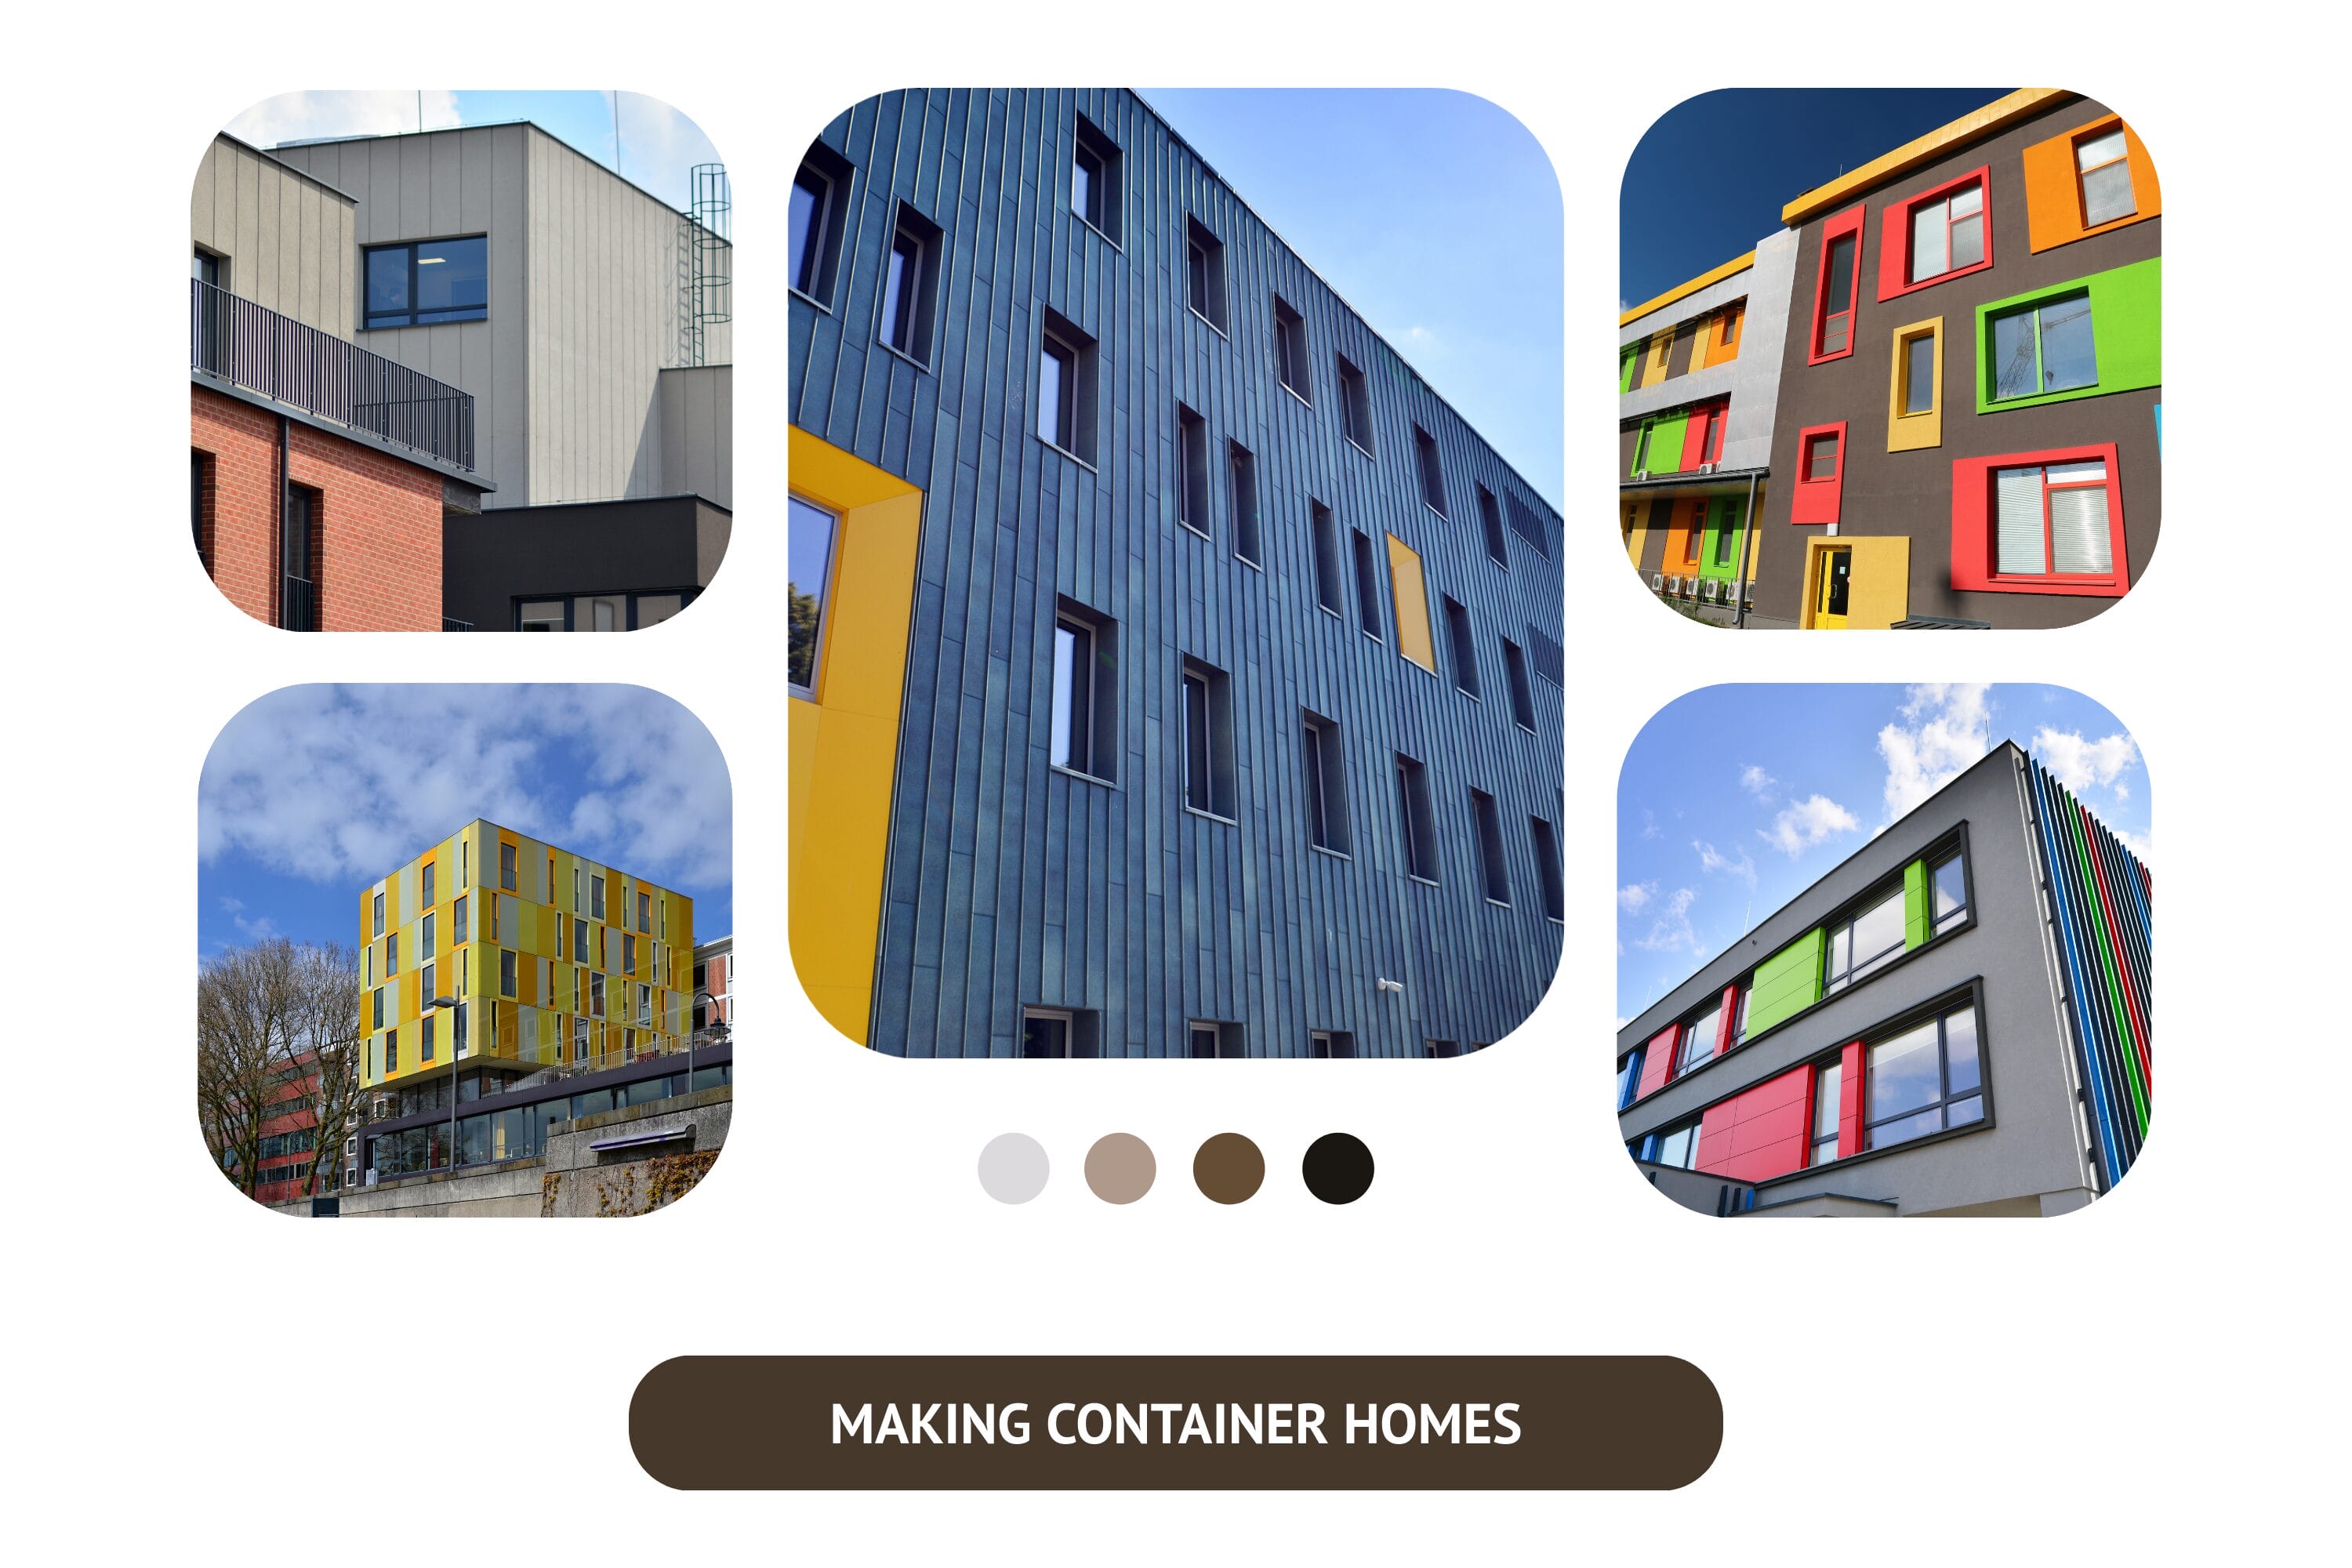 Creating container homes